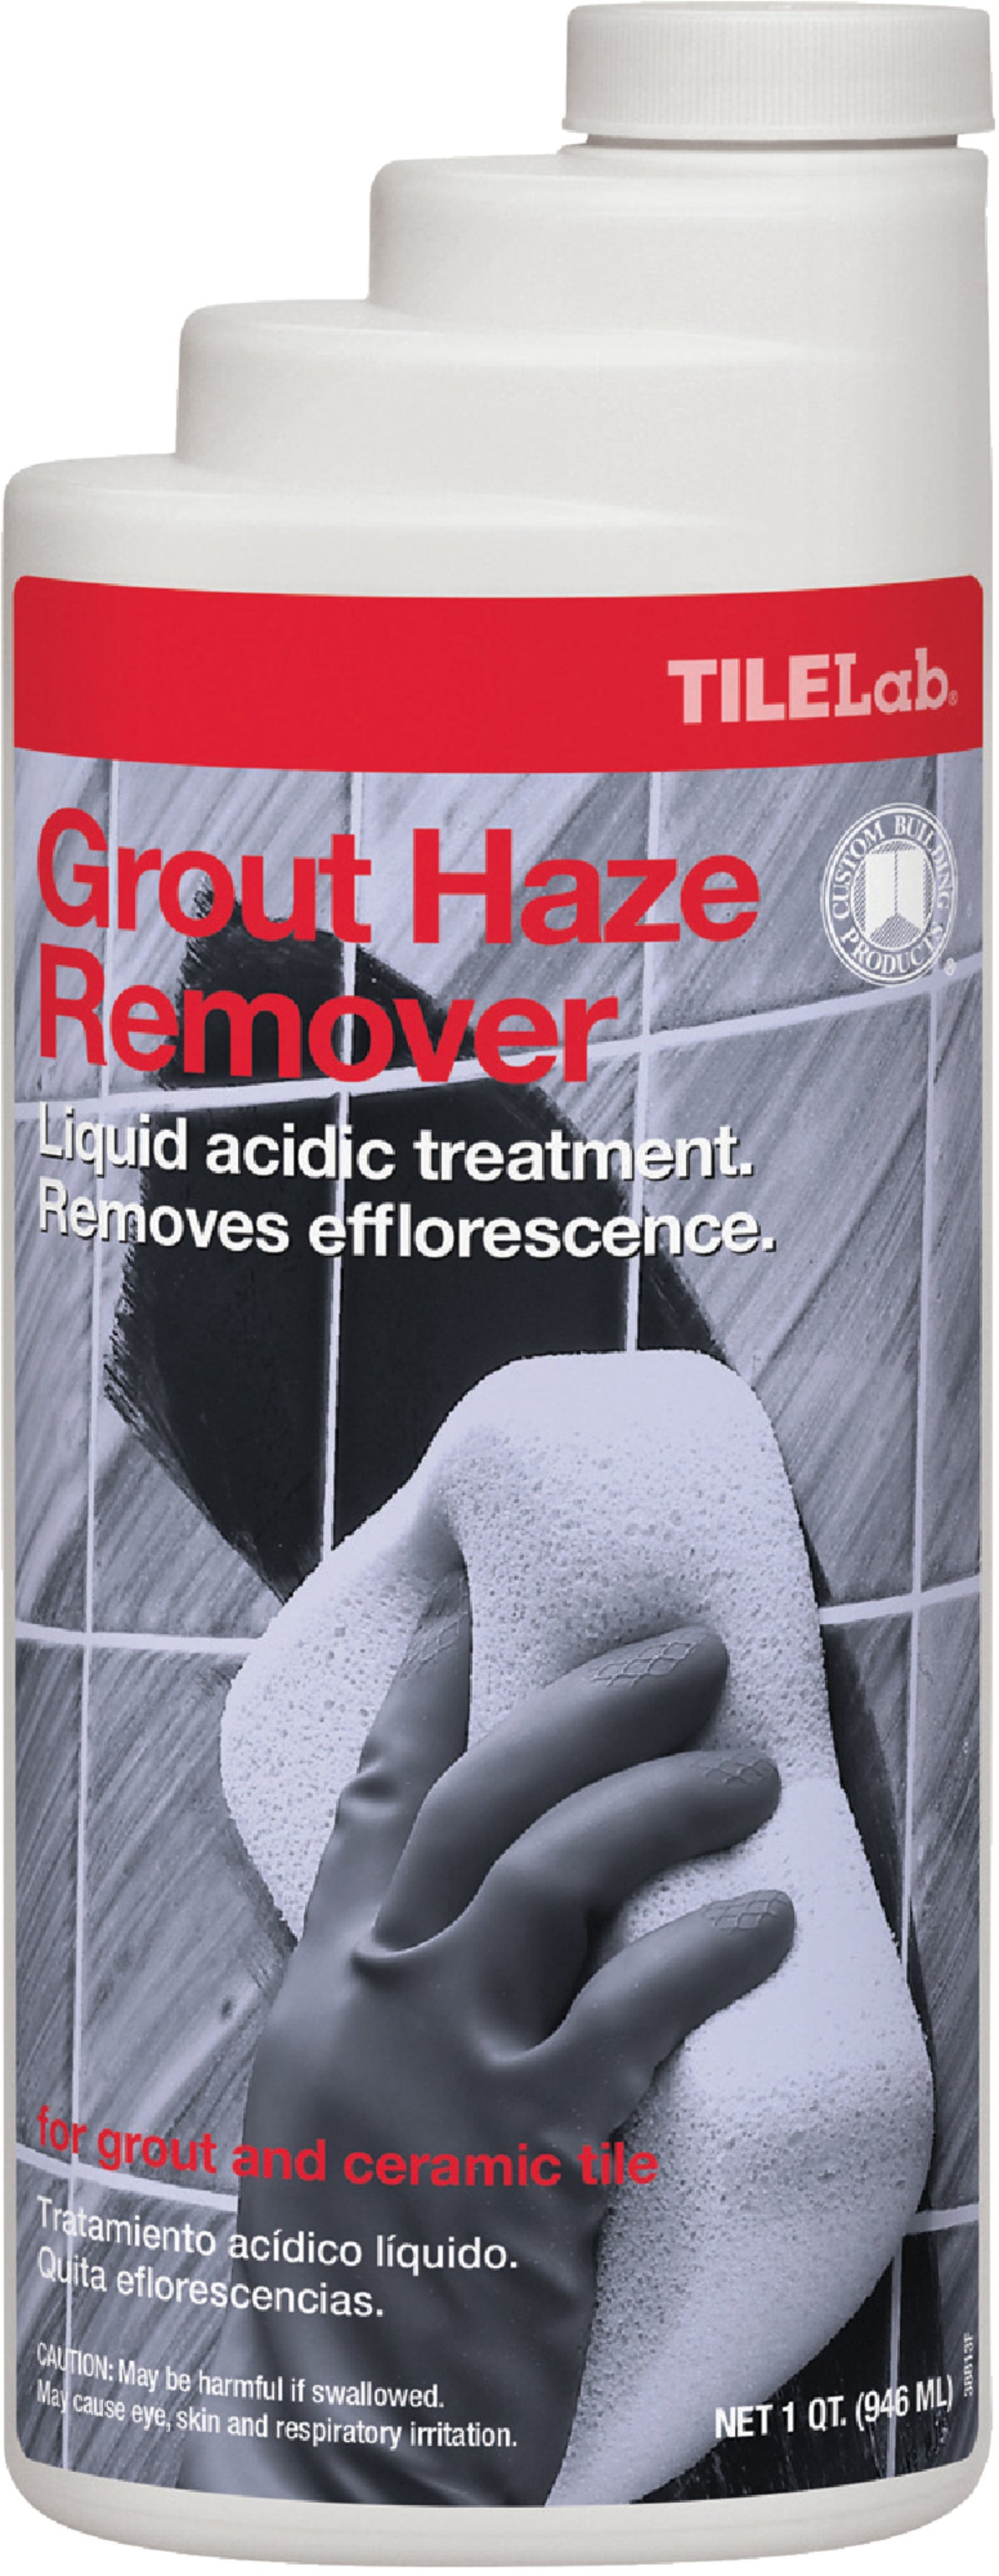 Grout haze cleaner